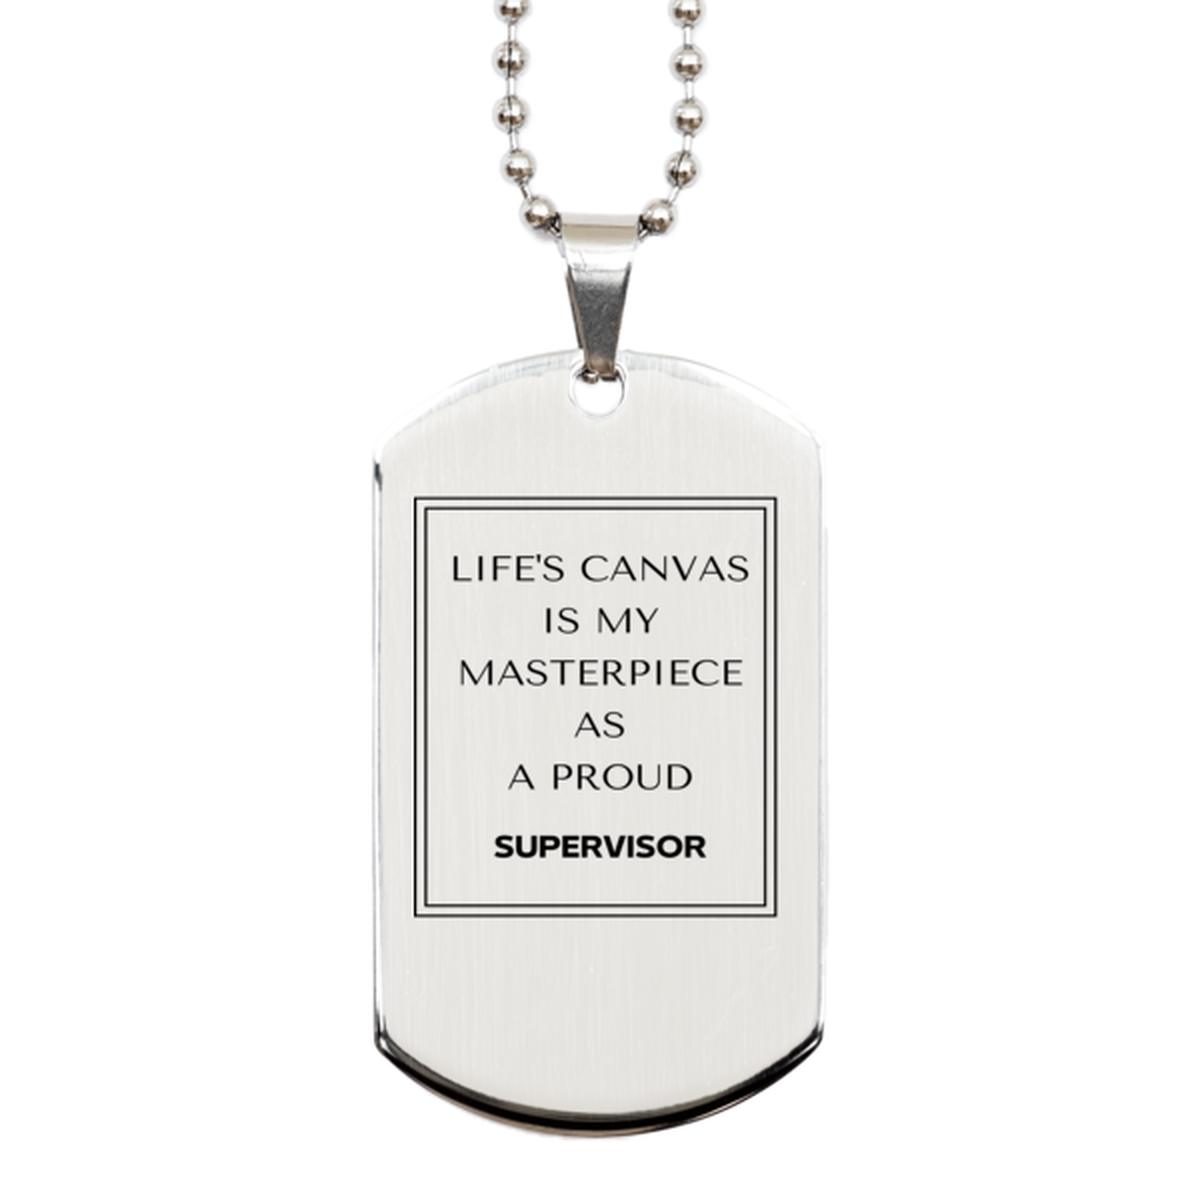 Proud Supervisor Gifts, Life's canvas is my masterpiece, Epic Birthday Christmas Unique Silver Dog Tag For Supervisor, Coworkers, Men, Women, Friends